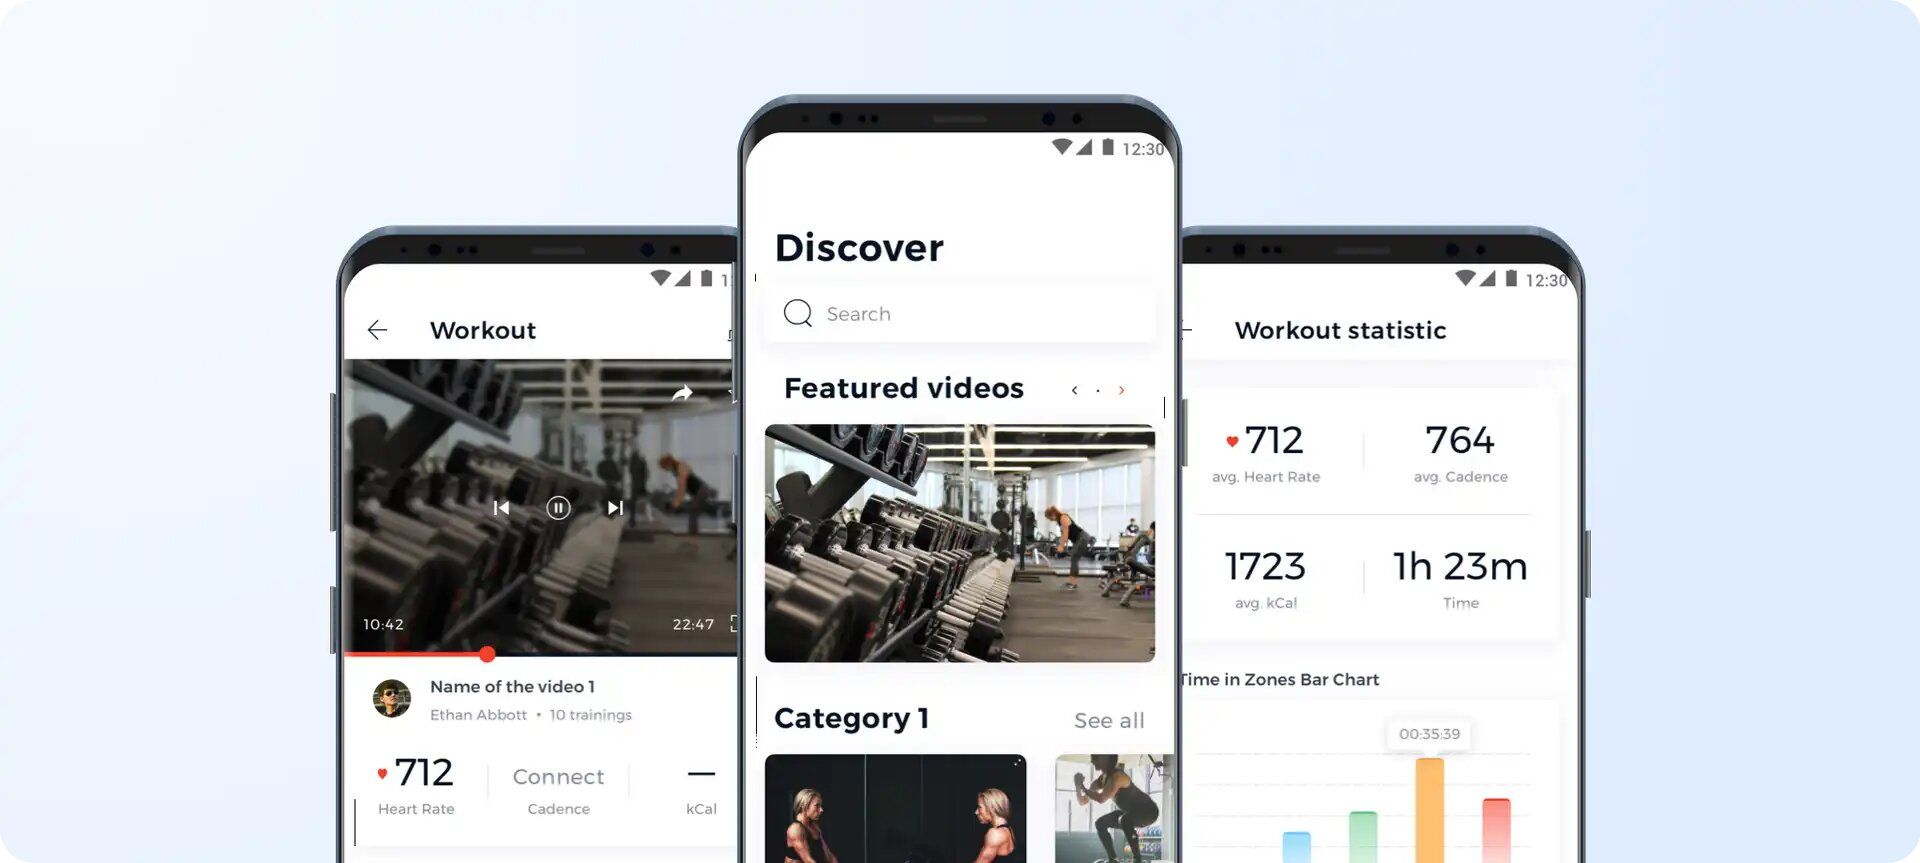 Platoon Fit is an amazing example of how mobile fitness applications can use IoT technologies to improve their services (*image by [Stormotion](https://stormotion.io/product/platoon-fit/){ rel="nofollow" target="_blank" .default-md}*)